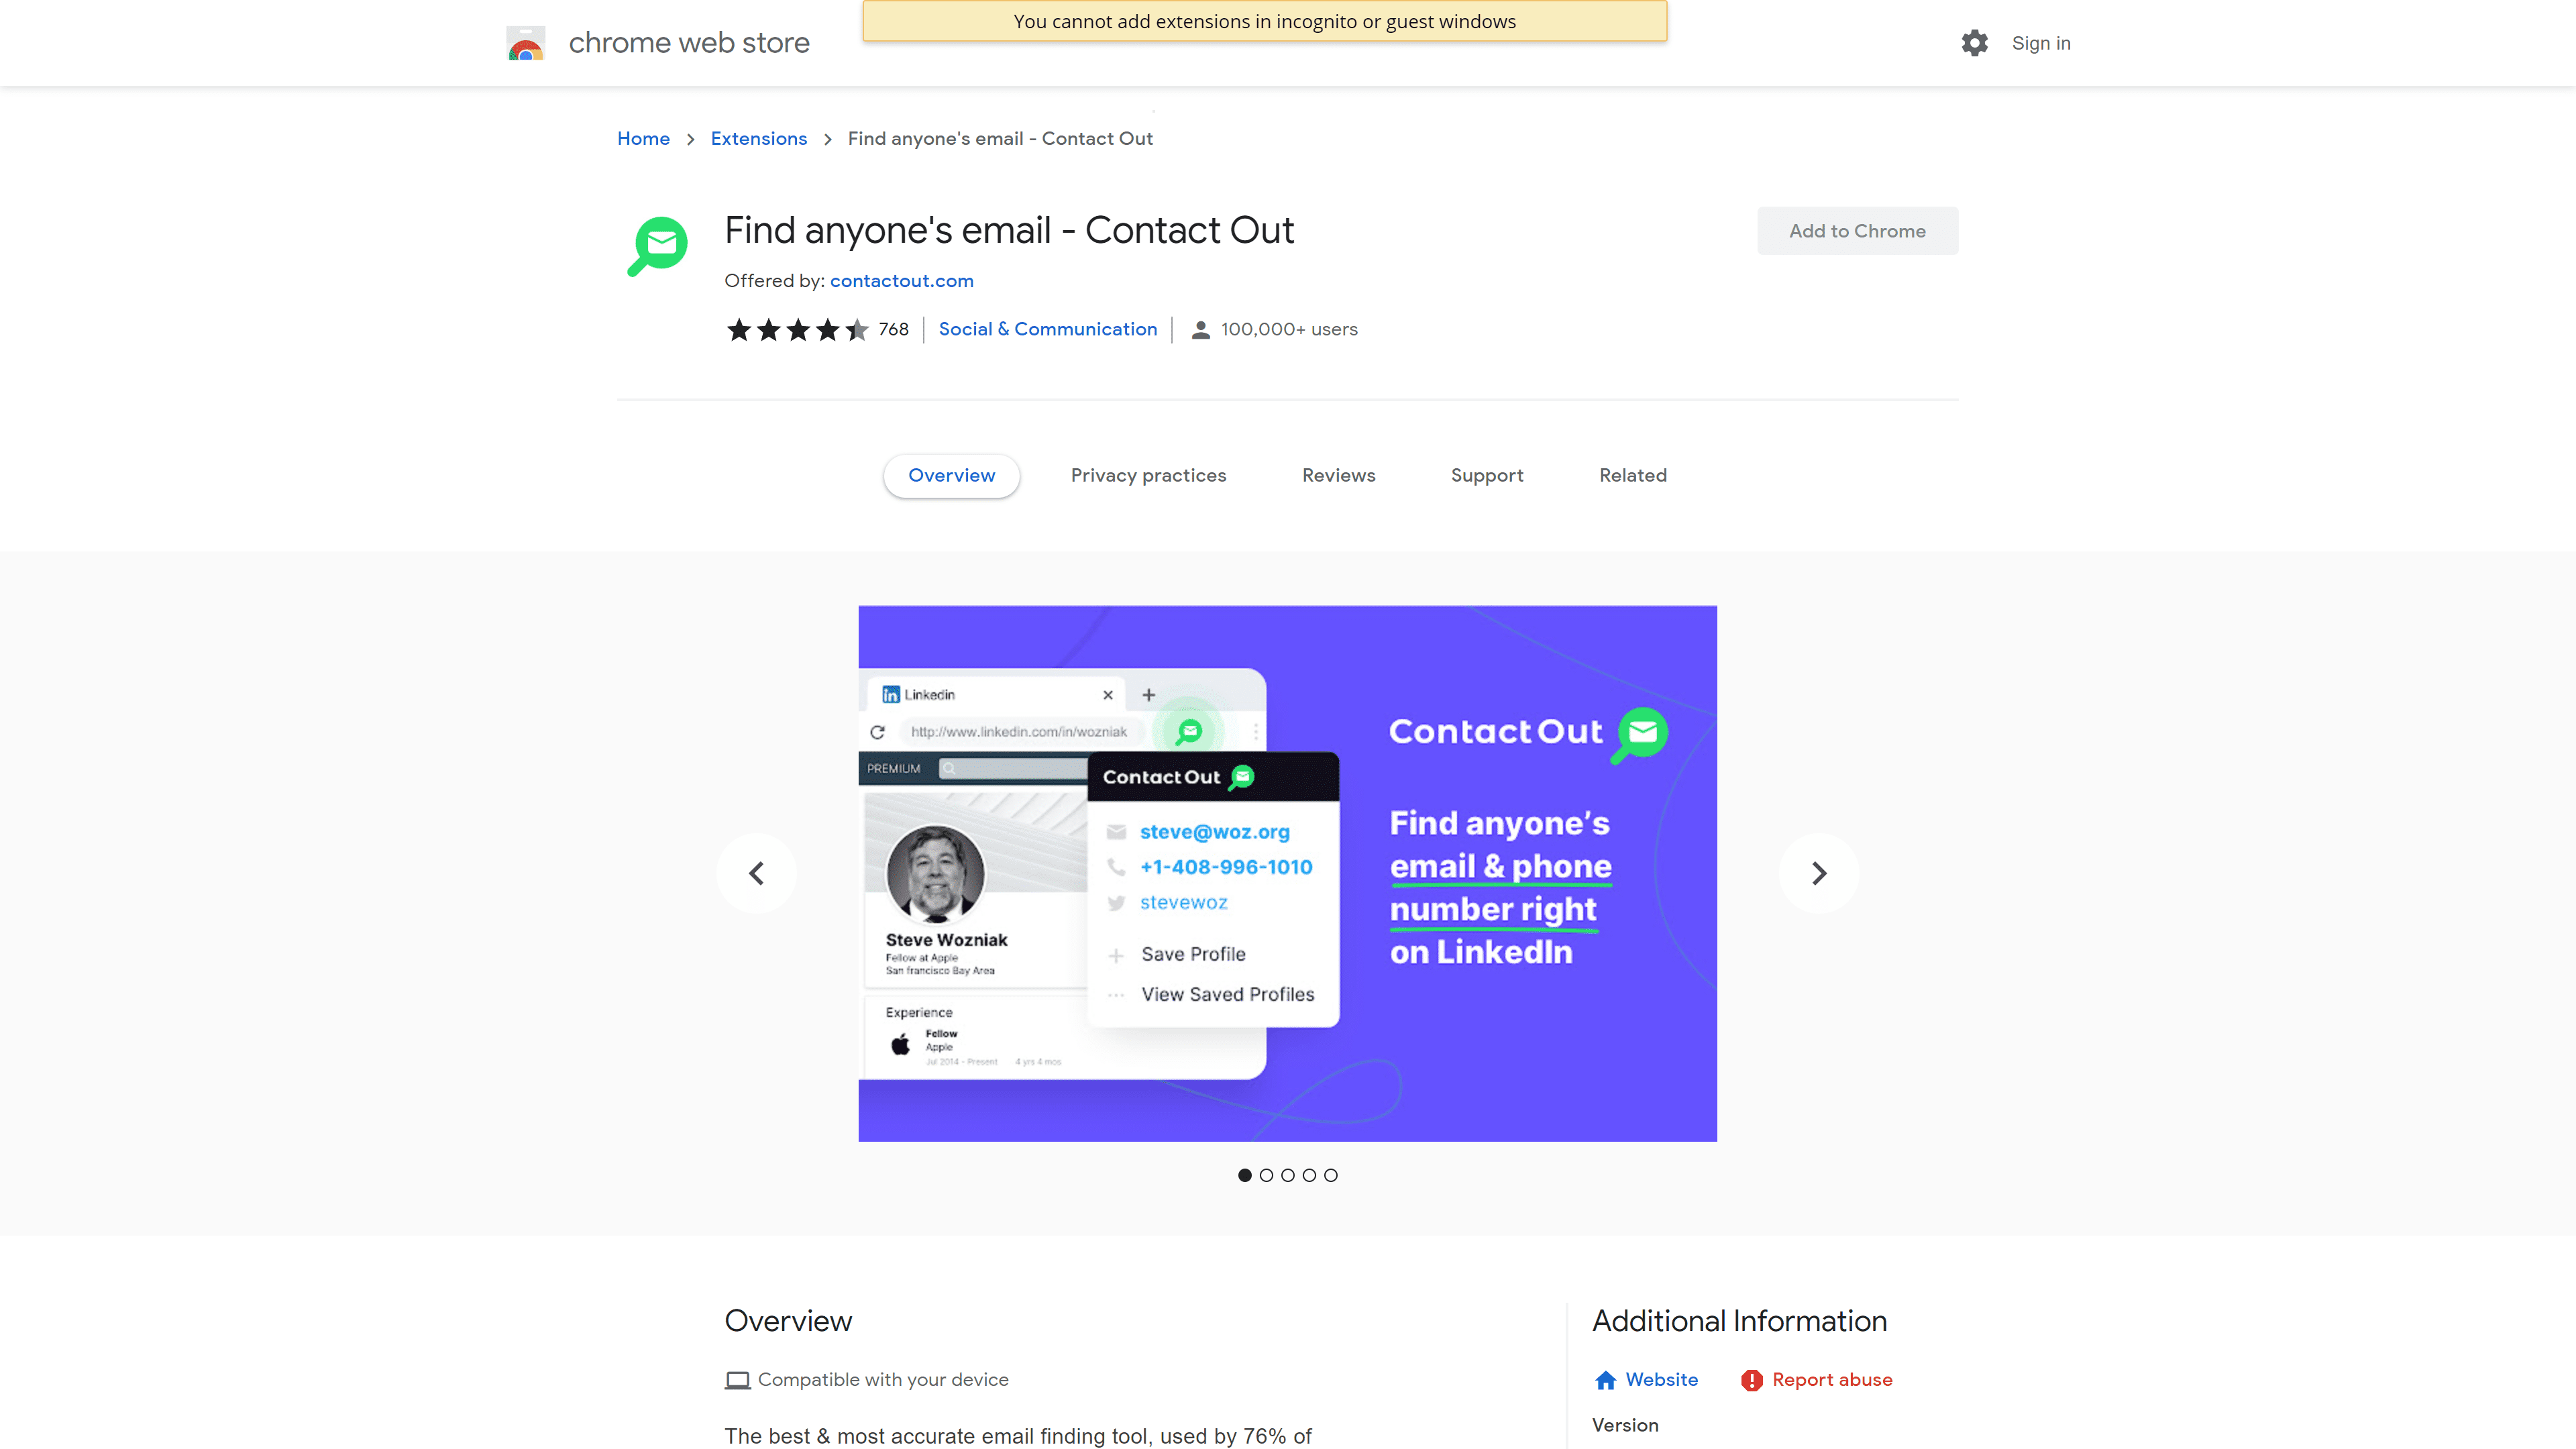 Find anyones email by Contact Out